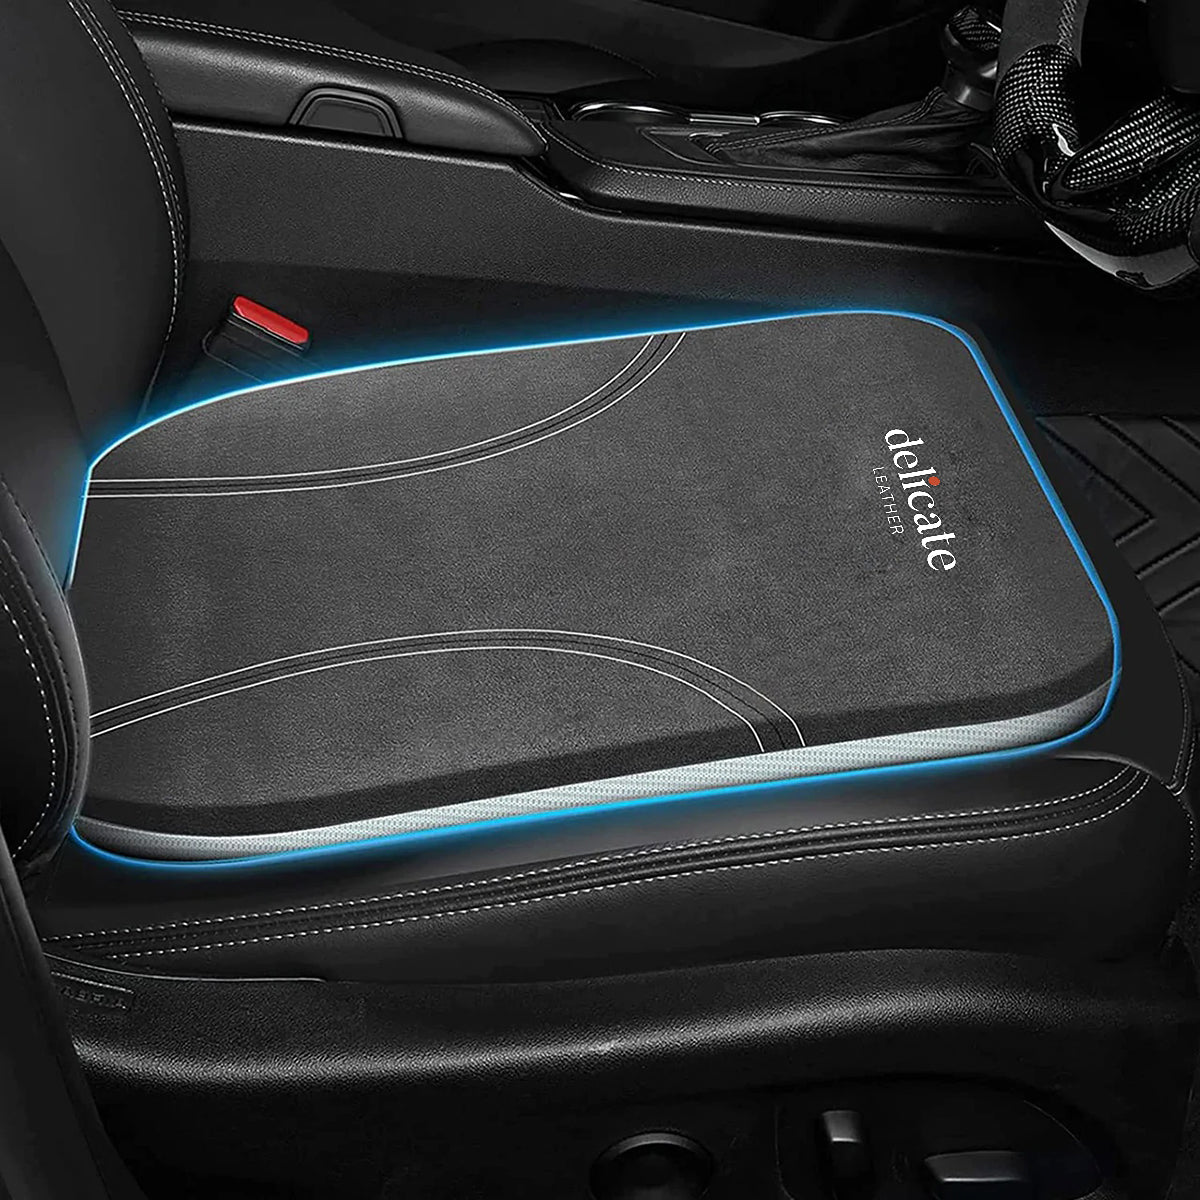 Nissan Car Seat Cushion: Enhance Comfort and Support for Your Drive